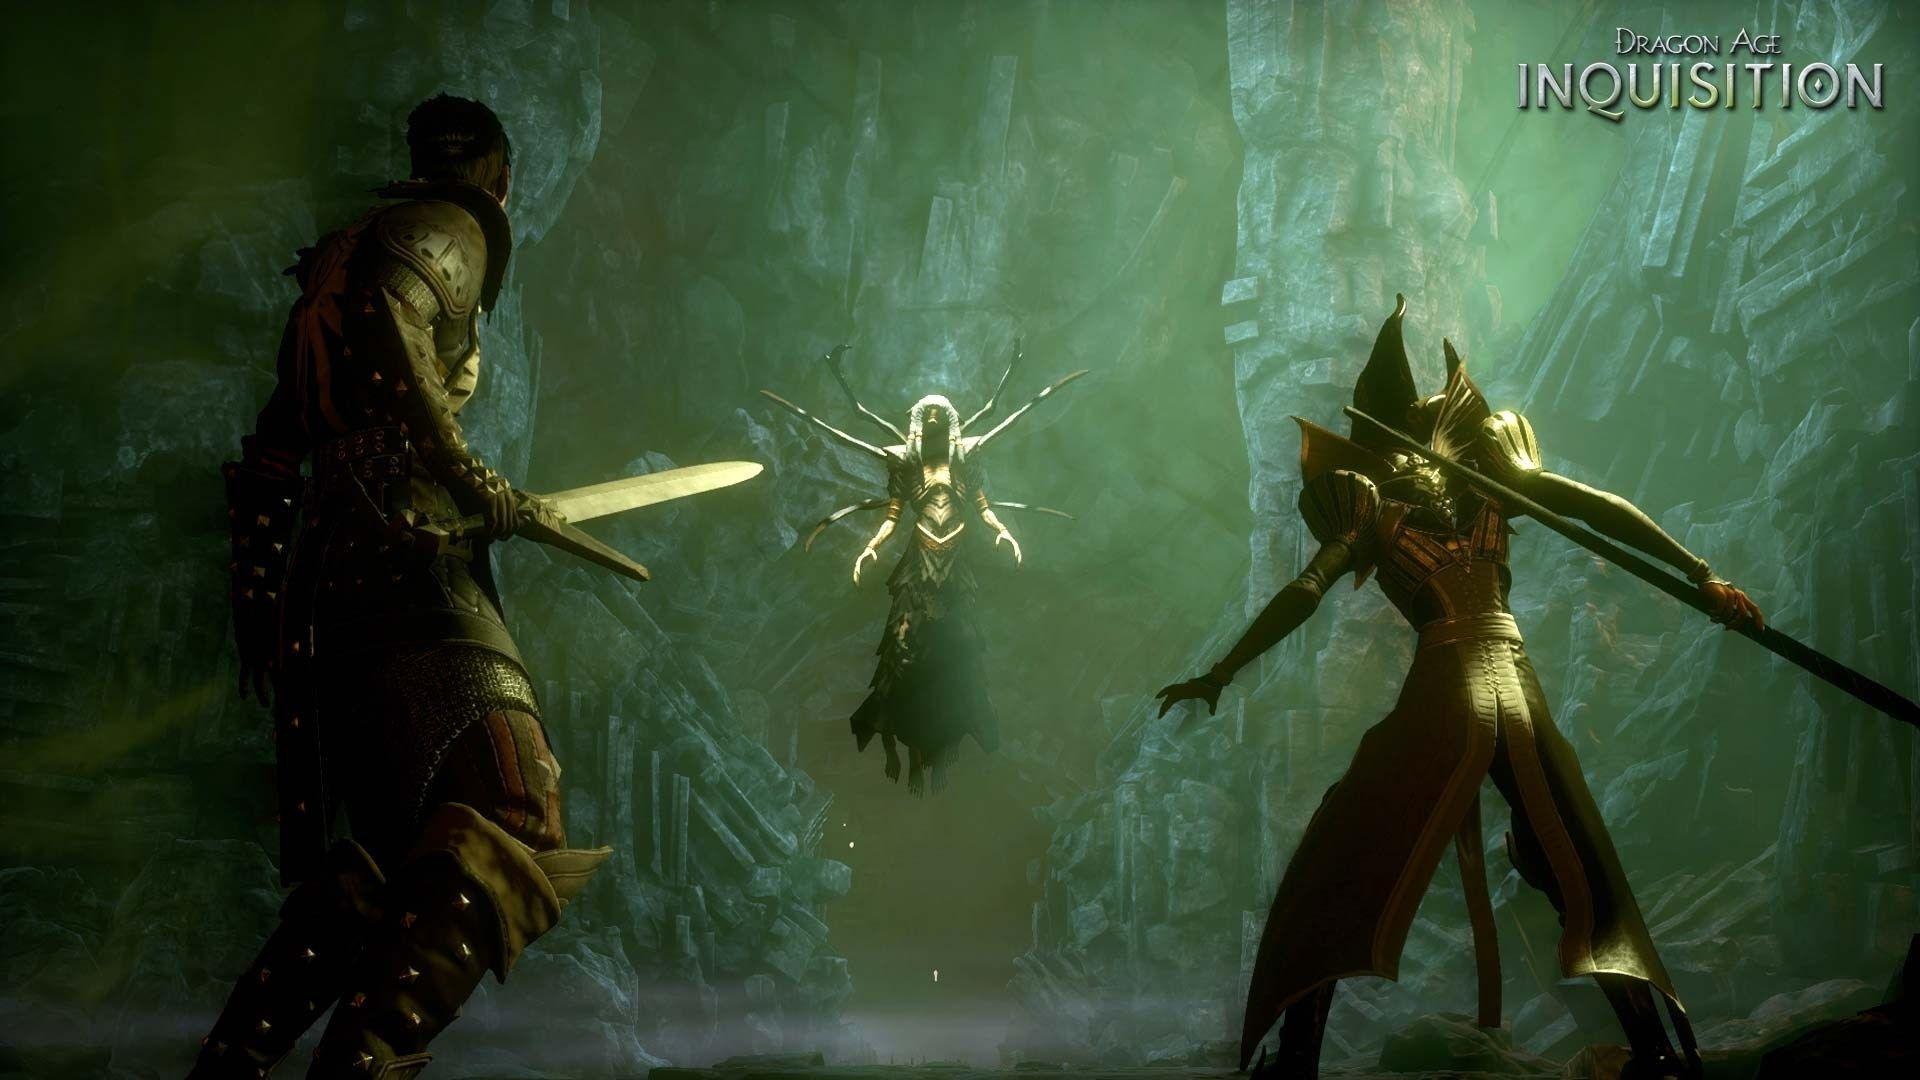 dragon age inquisition wallpaper HD background image, 1920x1080